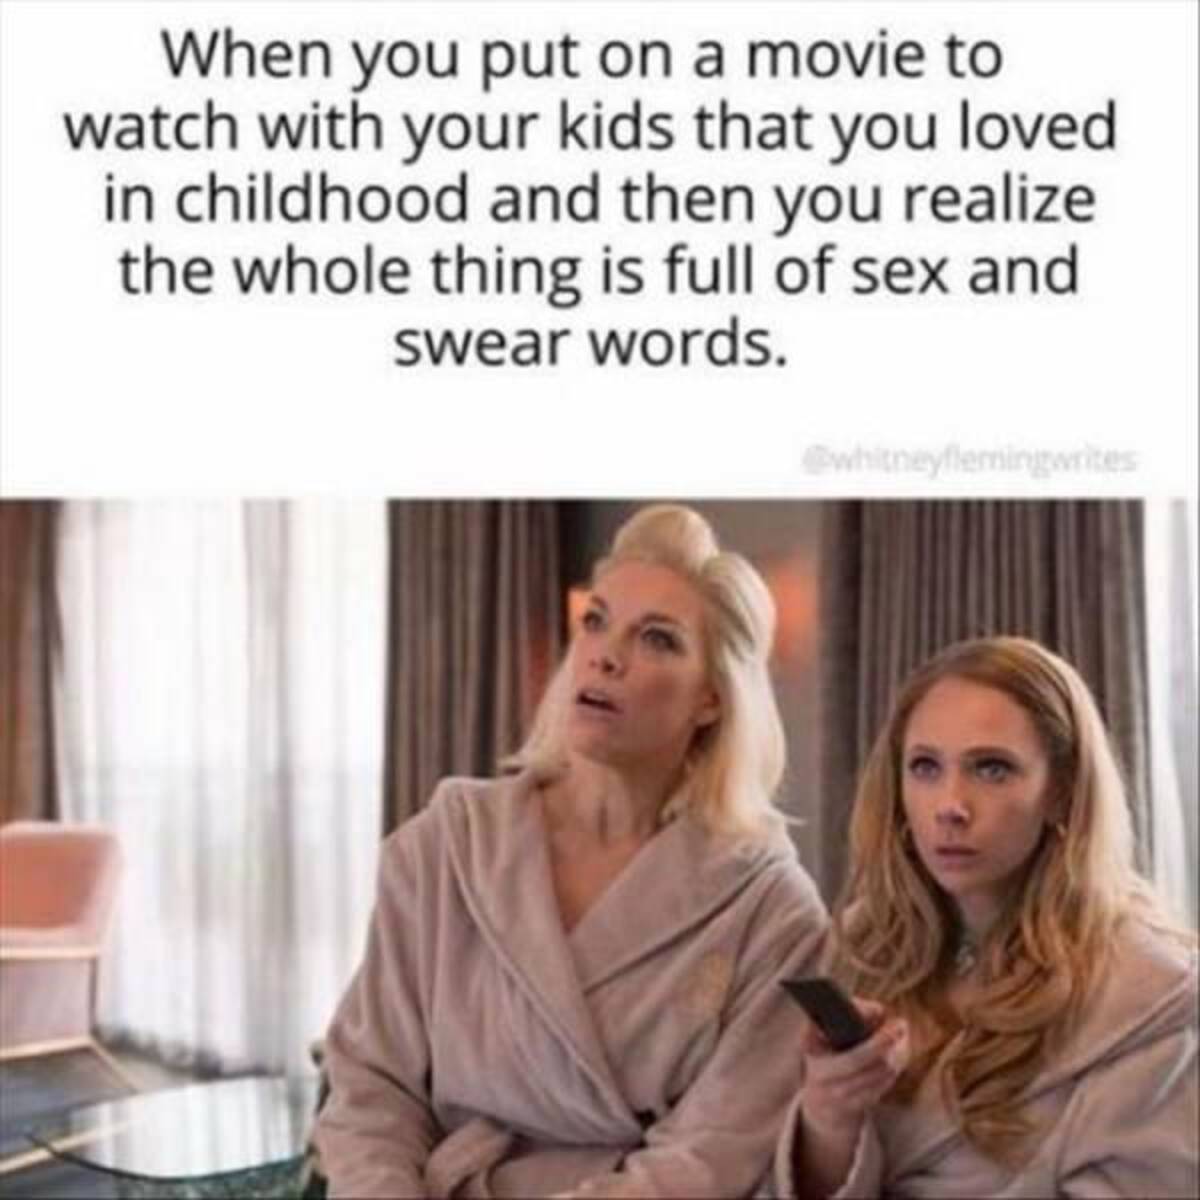 hannah waddingham and juno temple - When you put on a movie to watch with your kids that you loved in childhood and then you realize the whole thing is full of sex and swear words.